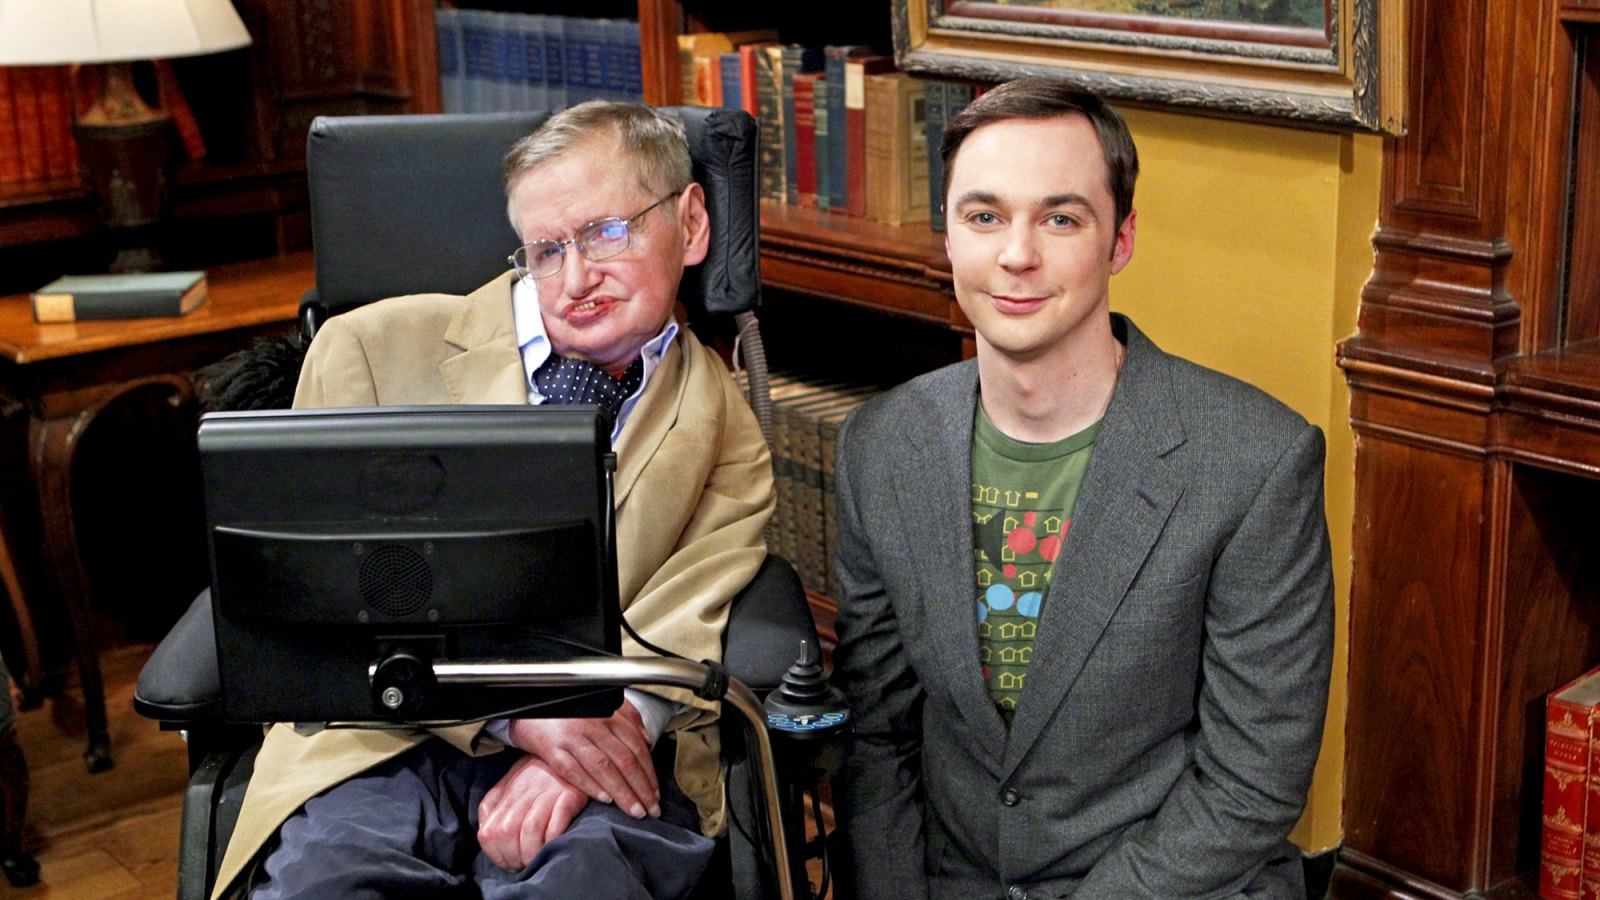 Stephen Hawking and Jim Parsons in ‘The Big Bang Theory‘